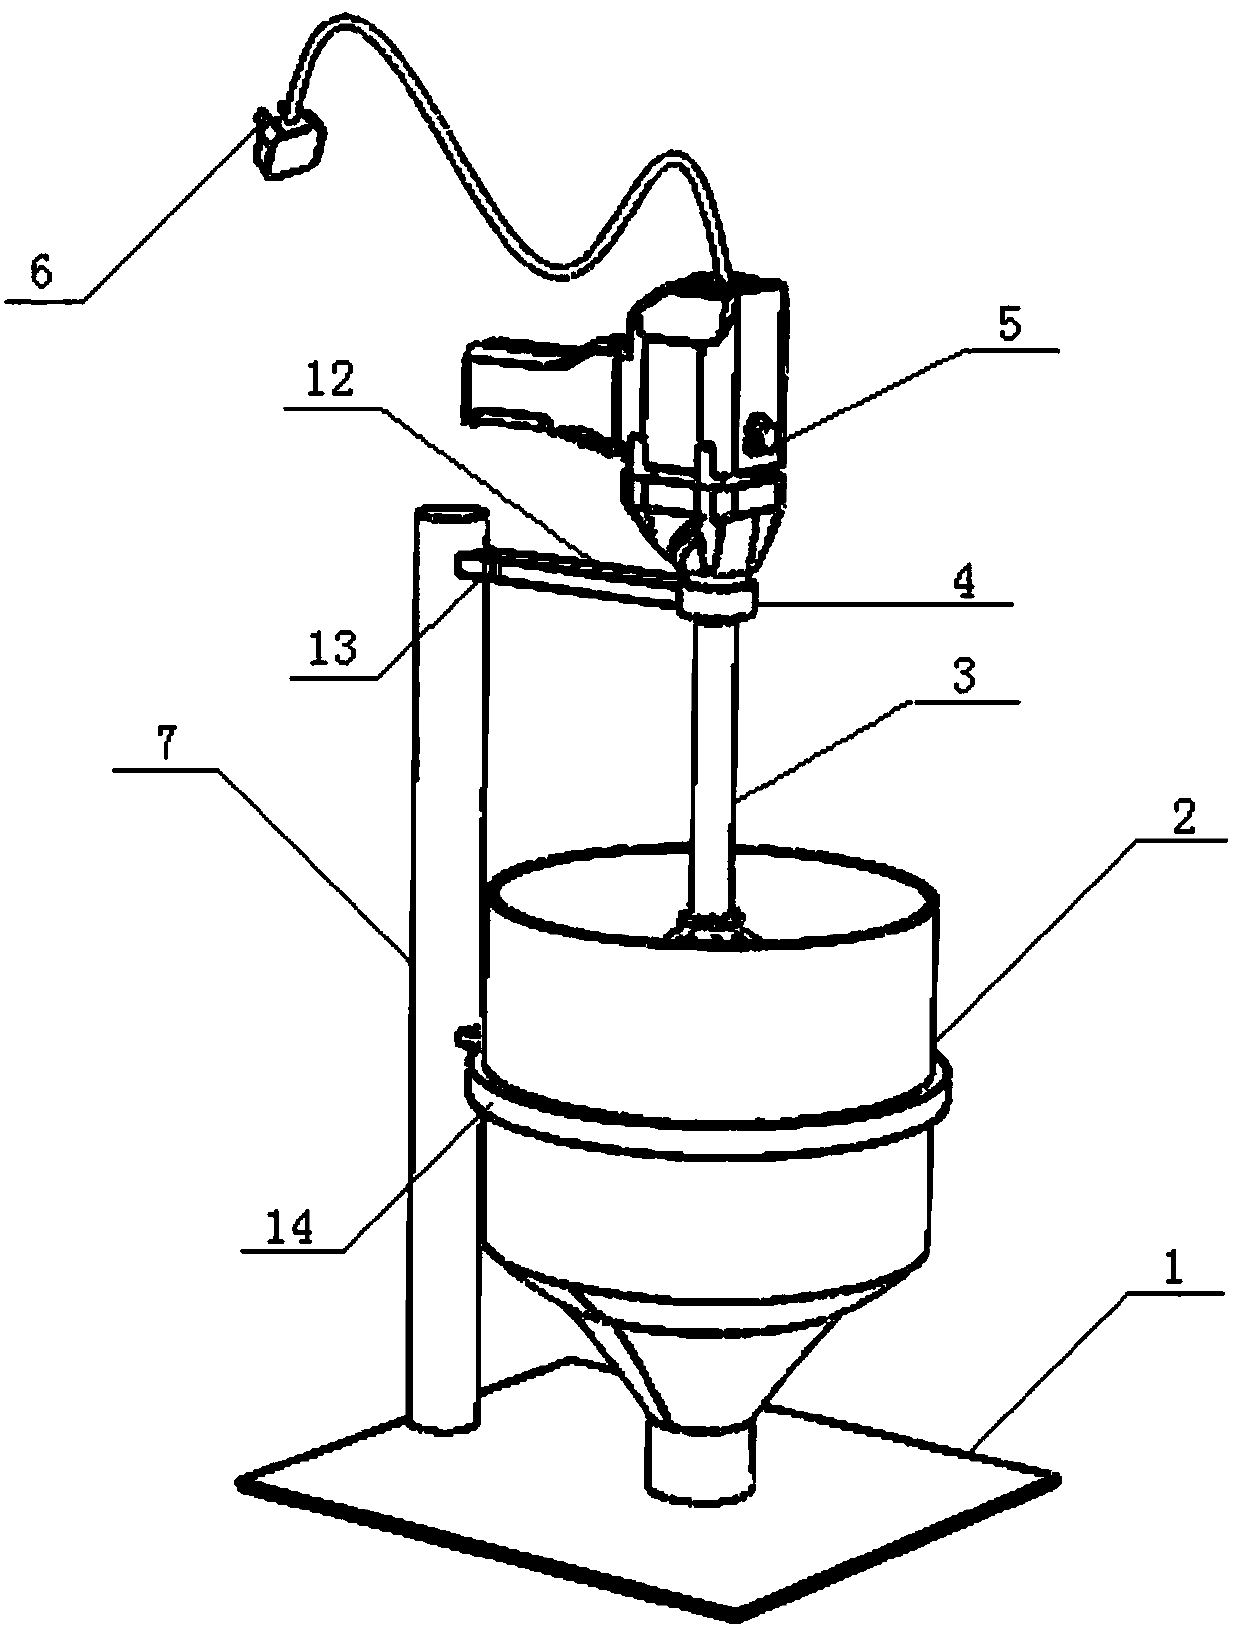 Electric pug mill for making soil sample of specific moisture content